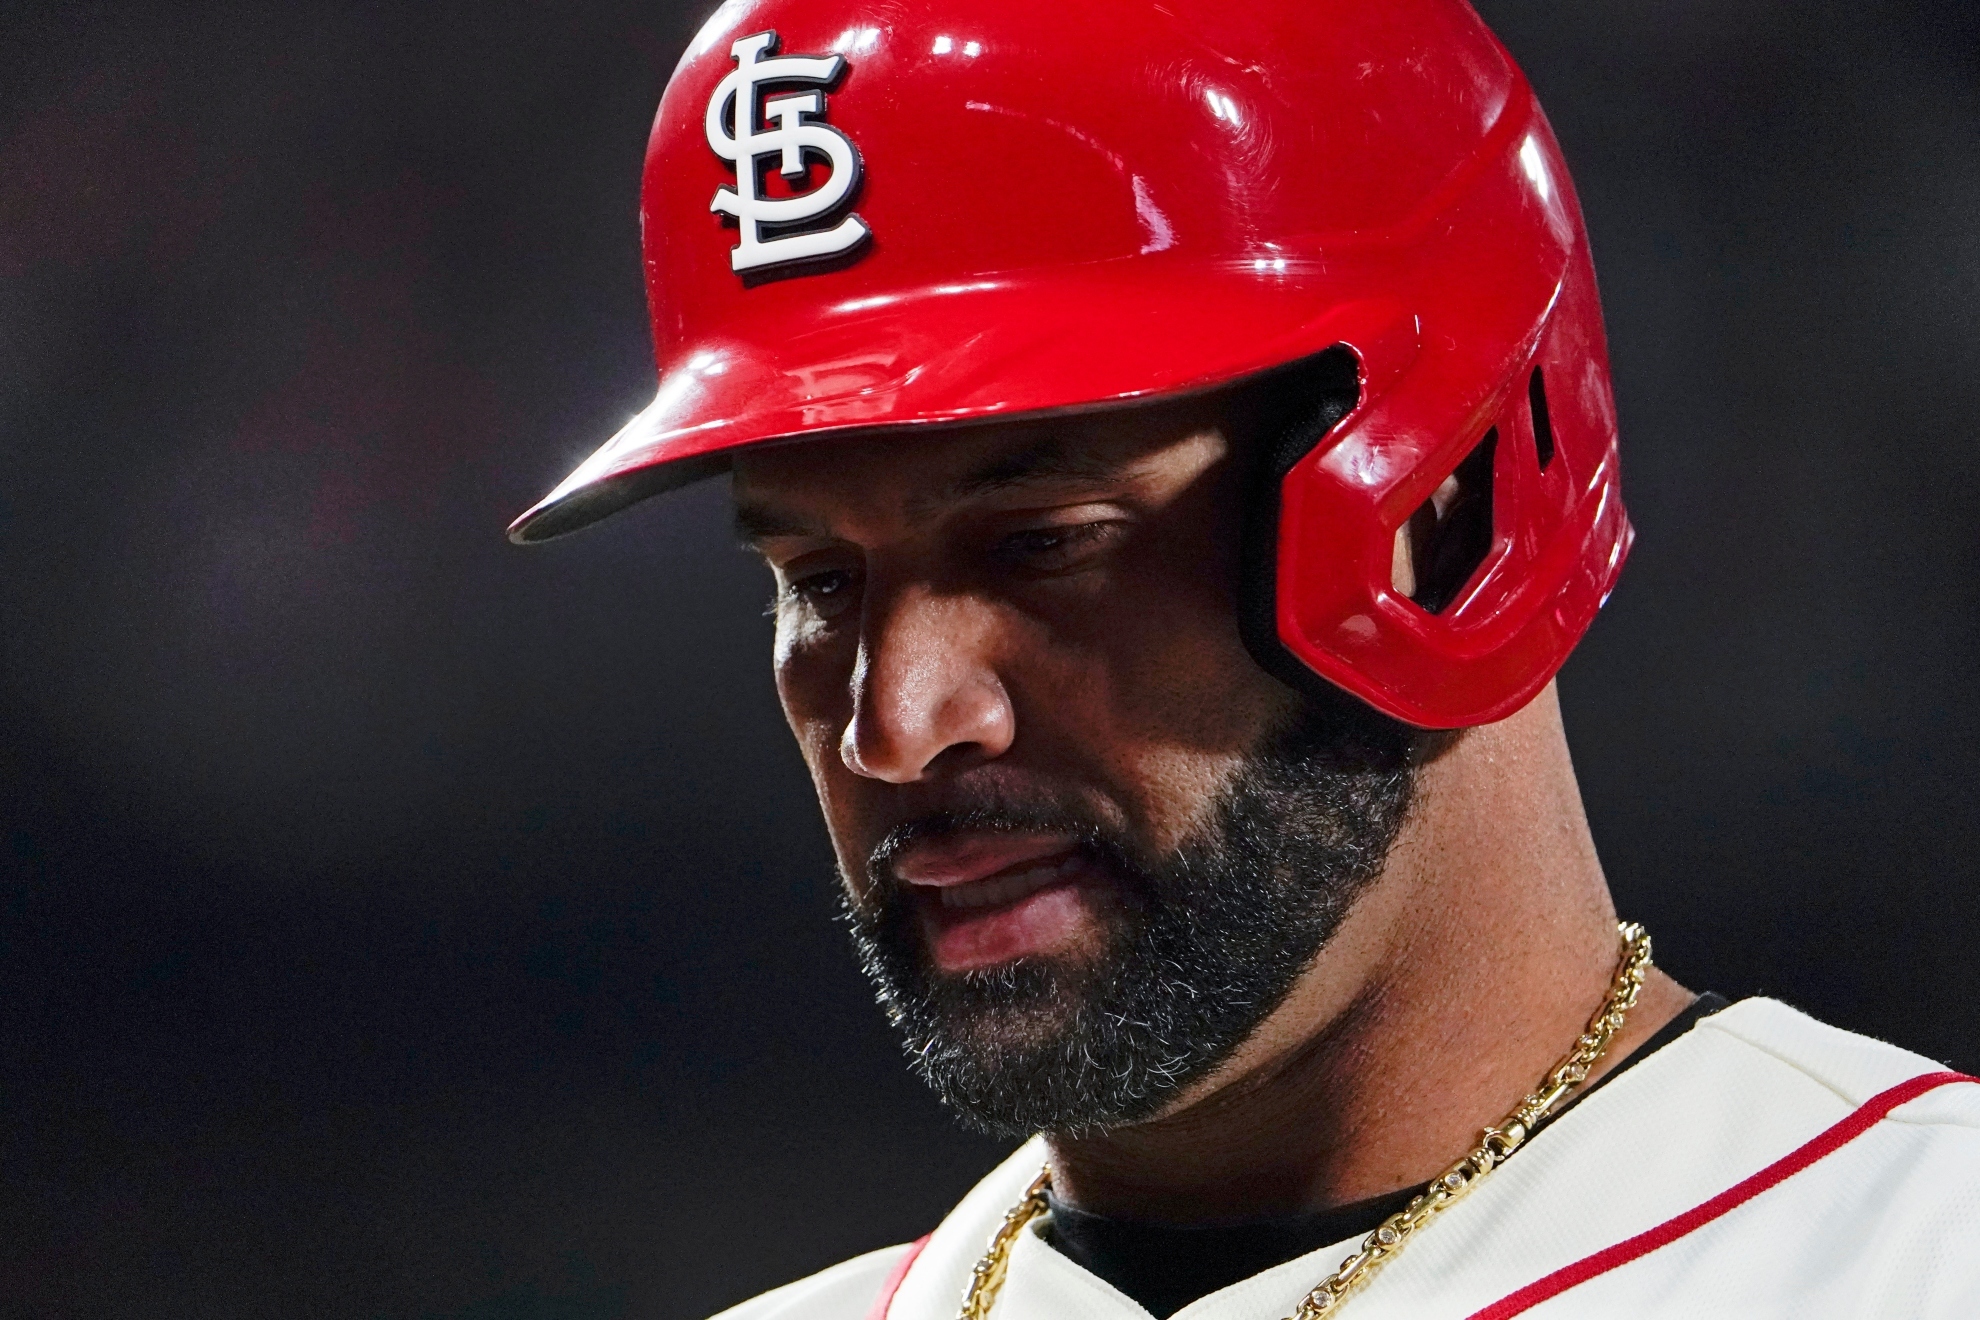 St. Louis Cardinals Albert Pujols walks to the dugout after grounding out to Philadelphia Phillies second baseman Jean Segura during the third inning in Game 2 of an NL wild-card baseball playoff series Saturday, Oct. 8, 2022, in St. Louis / AP